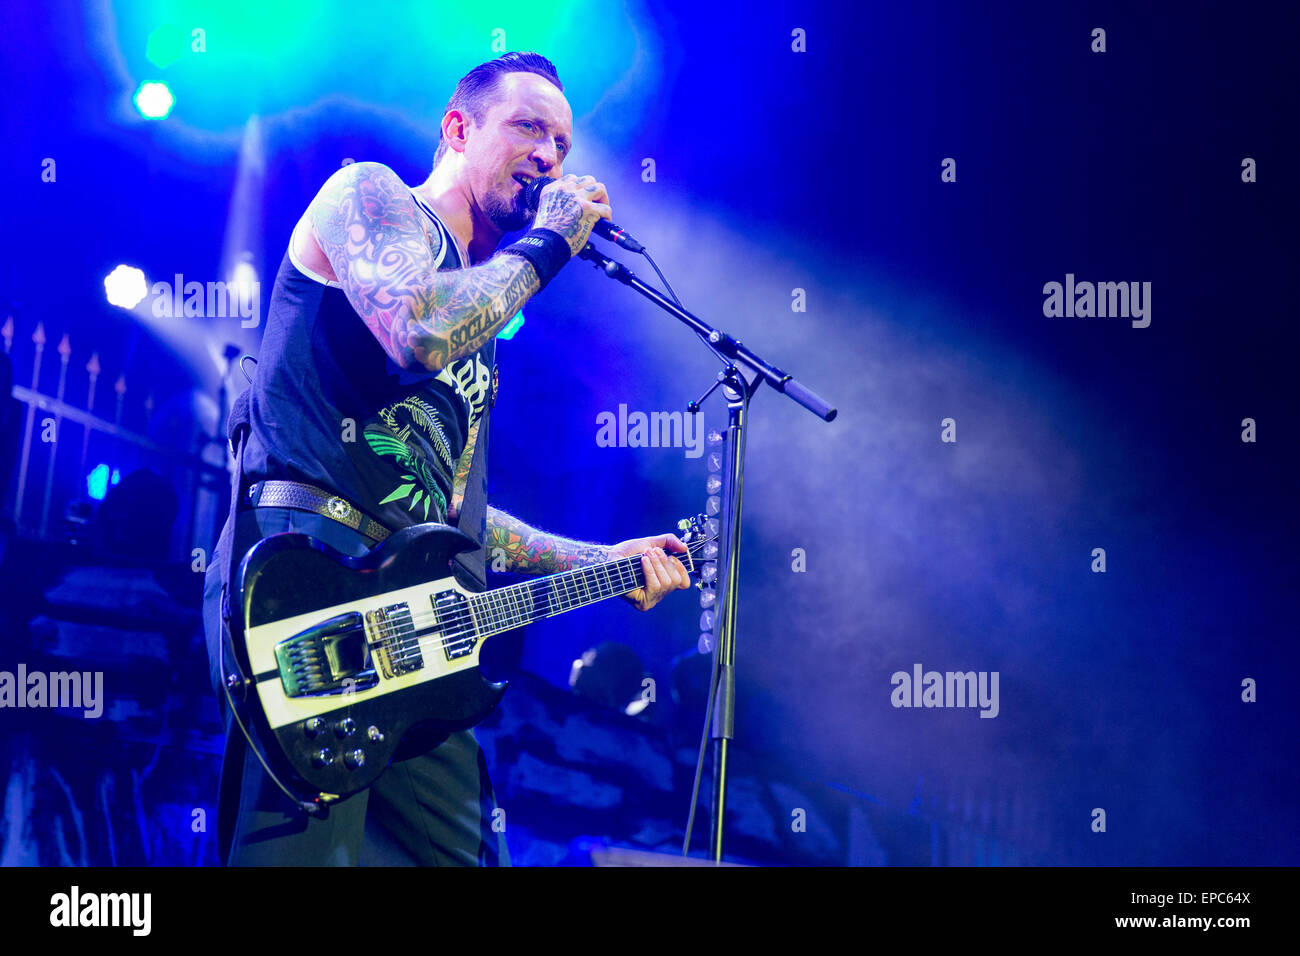 Page 3 - Volbeat Band High Resolution Stock Photography and Images - Alamy